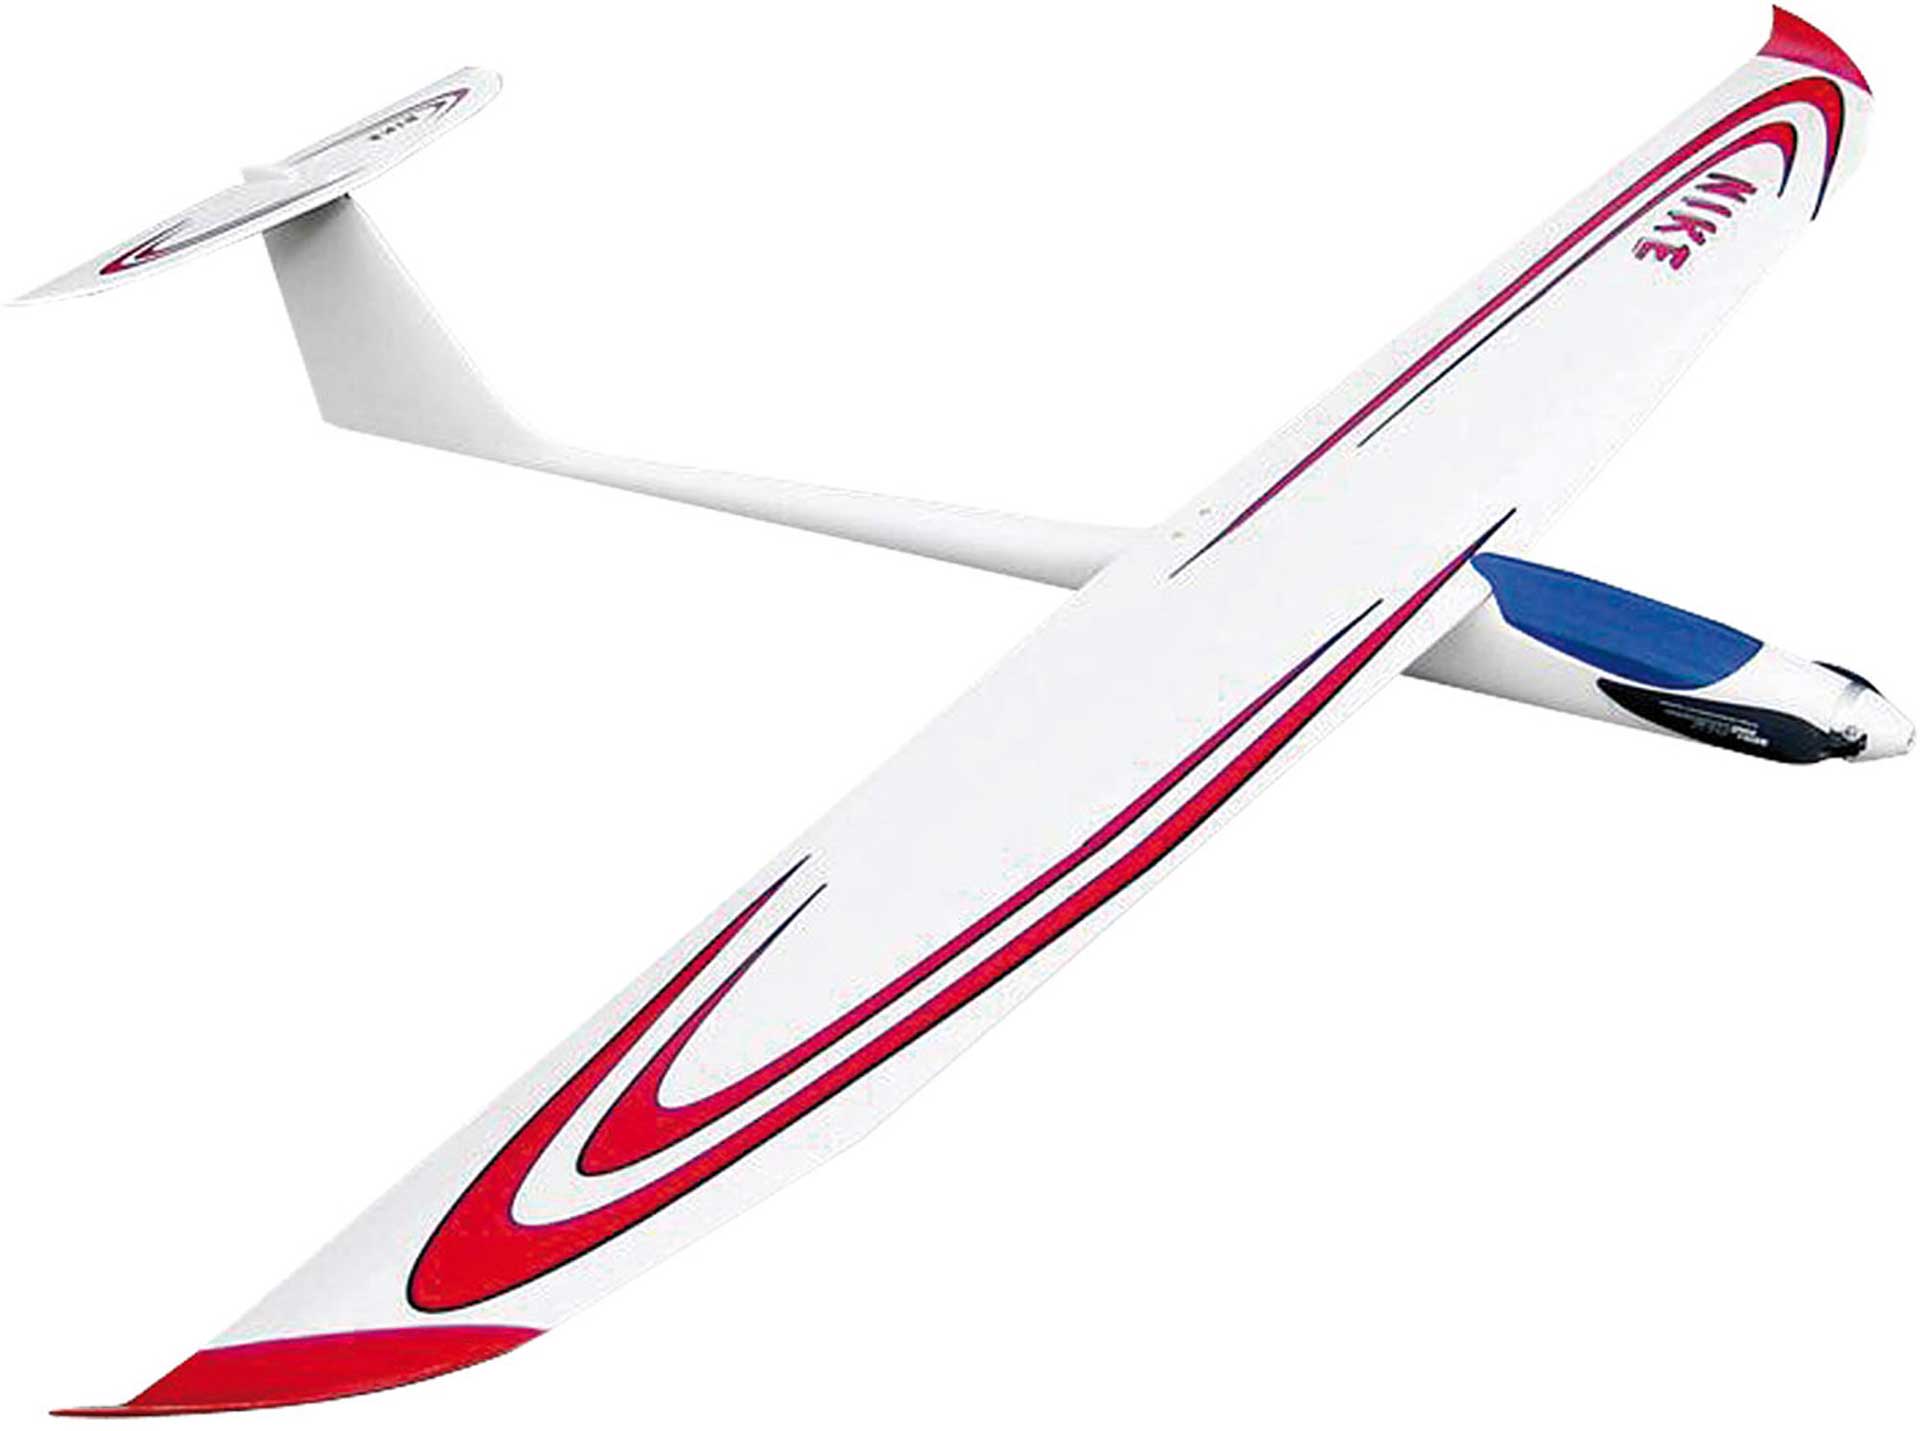 TOPMODEL NIKE EVO ELECTRO WITH GRP FUSELAGE AND STYRO BALSA WING WITH FULL COMPOSITE FUSELAGE AND STYRO BALSA WINGS